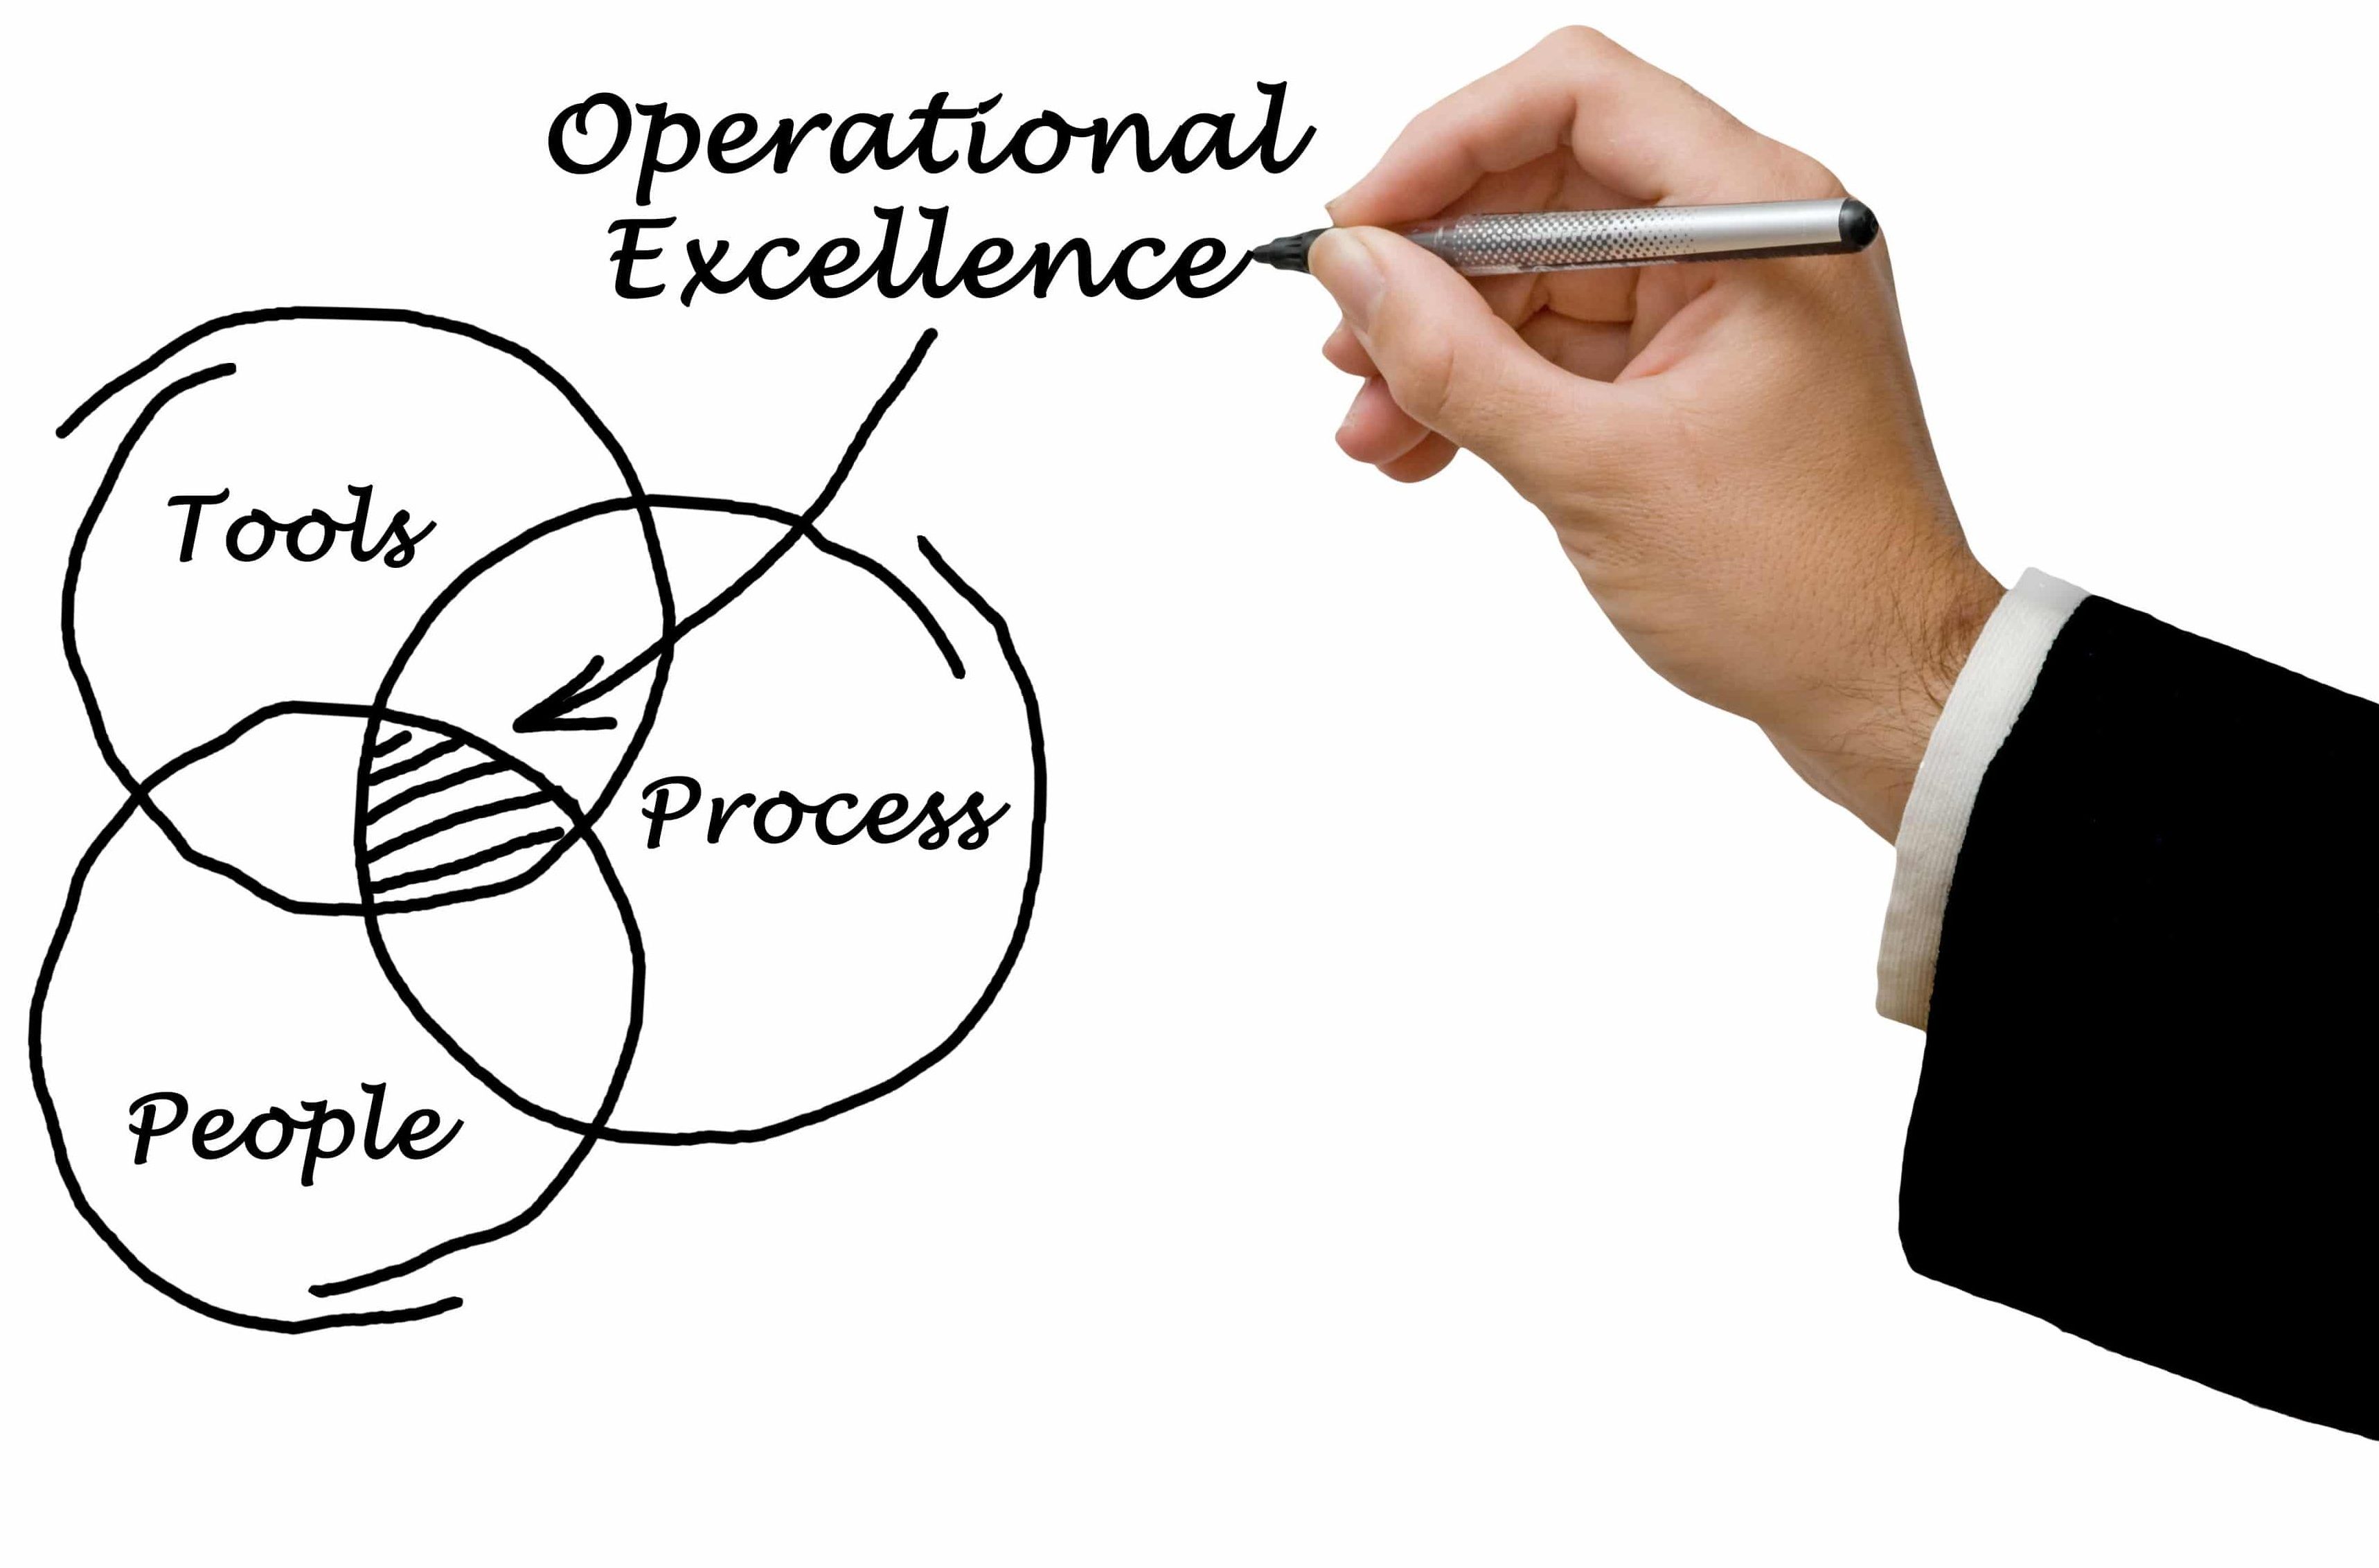 Operational-Excellence-Chemical-Industry